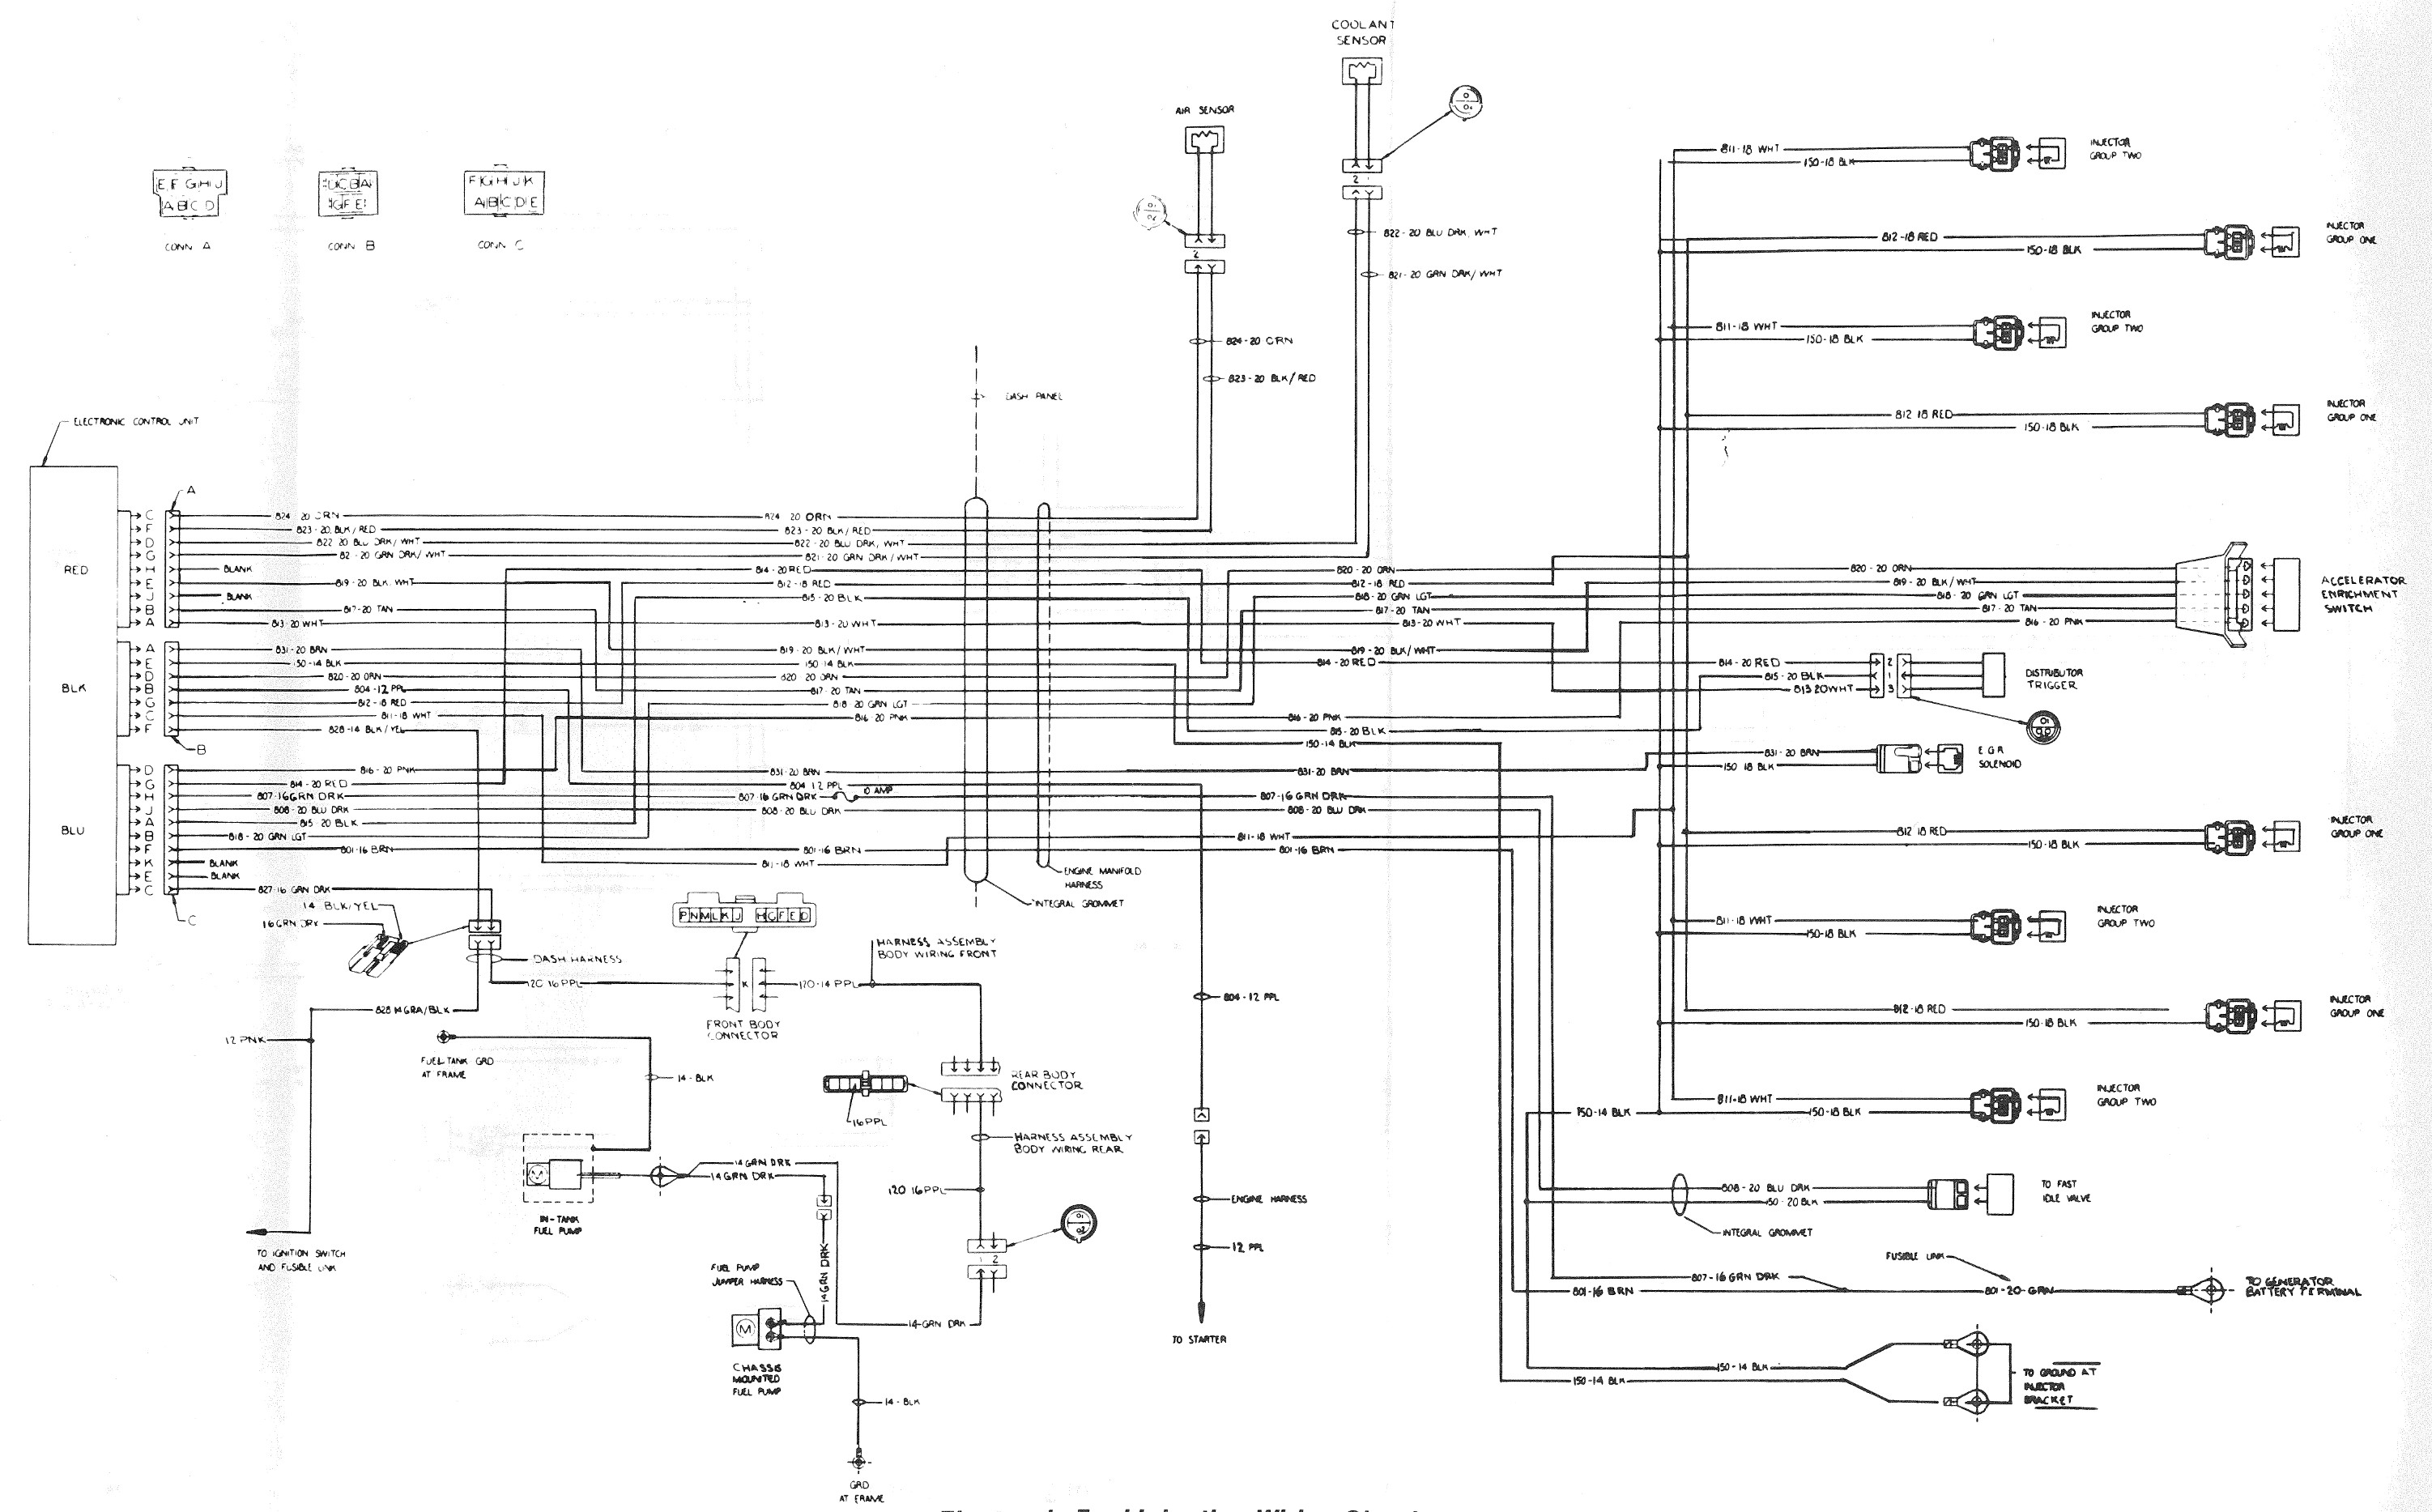 Electronic Fuel Injection Wiring Circuit. 1977